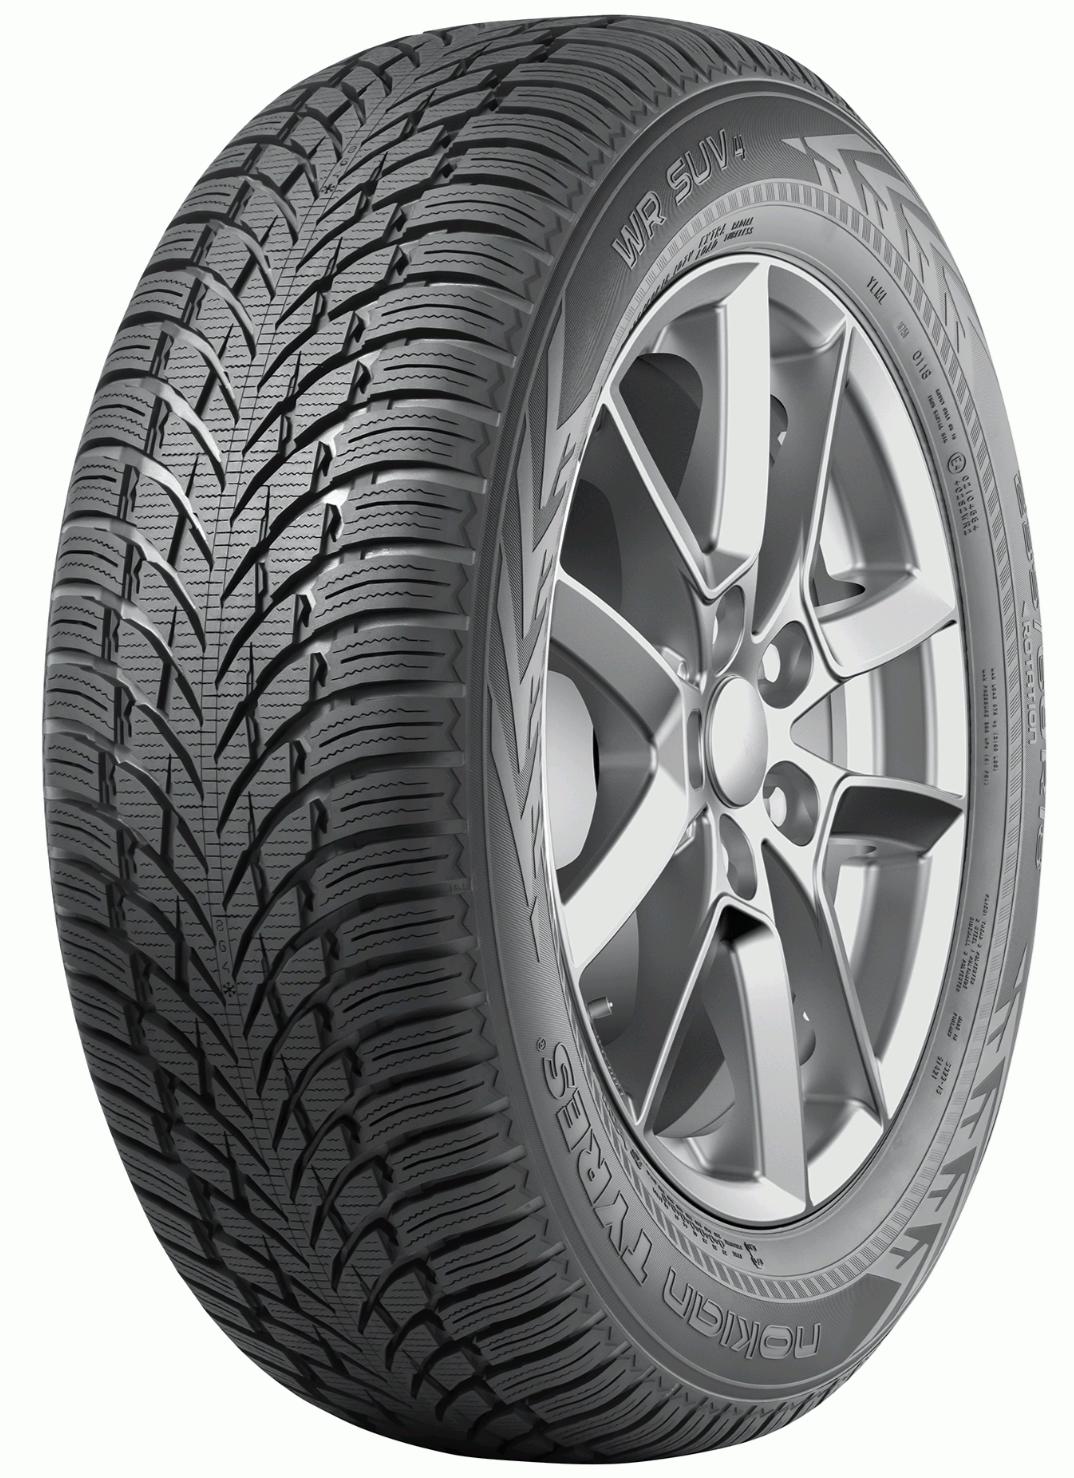 SUV Reviews WR and Tests Nokian 4 Tire -